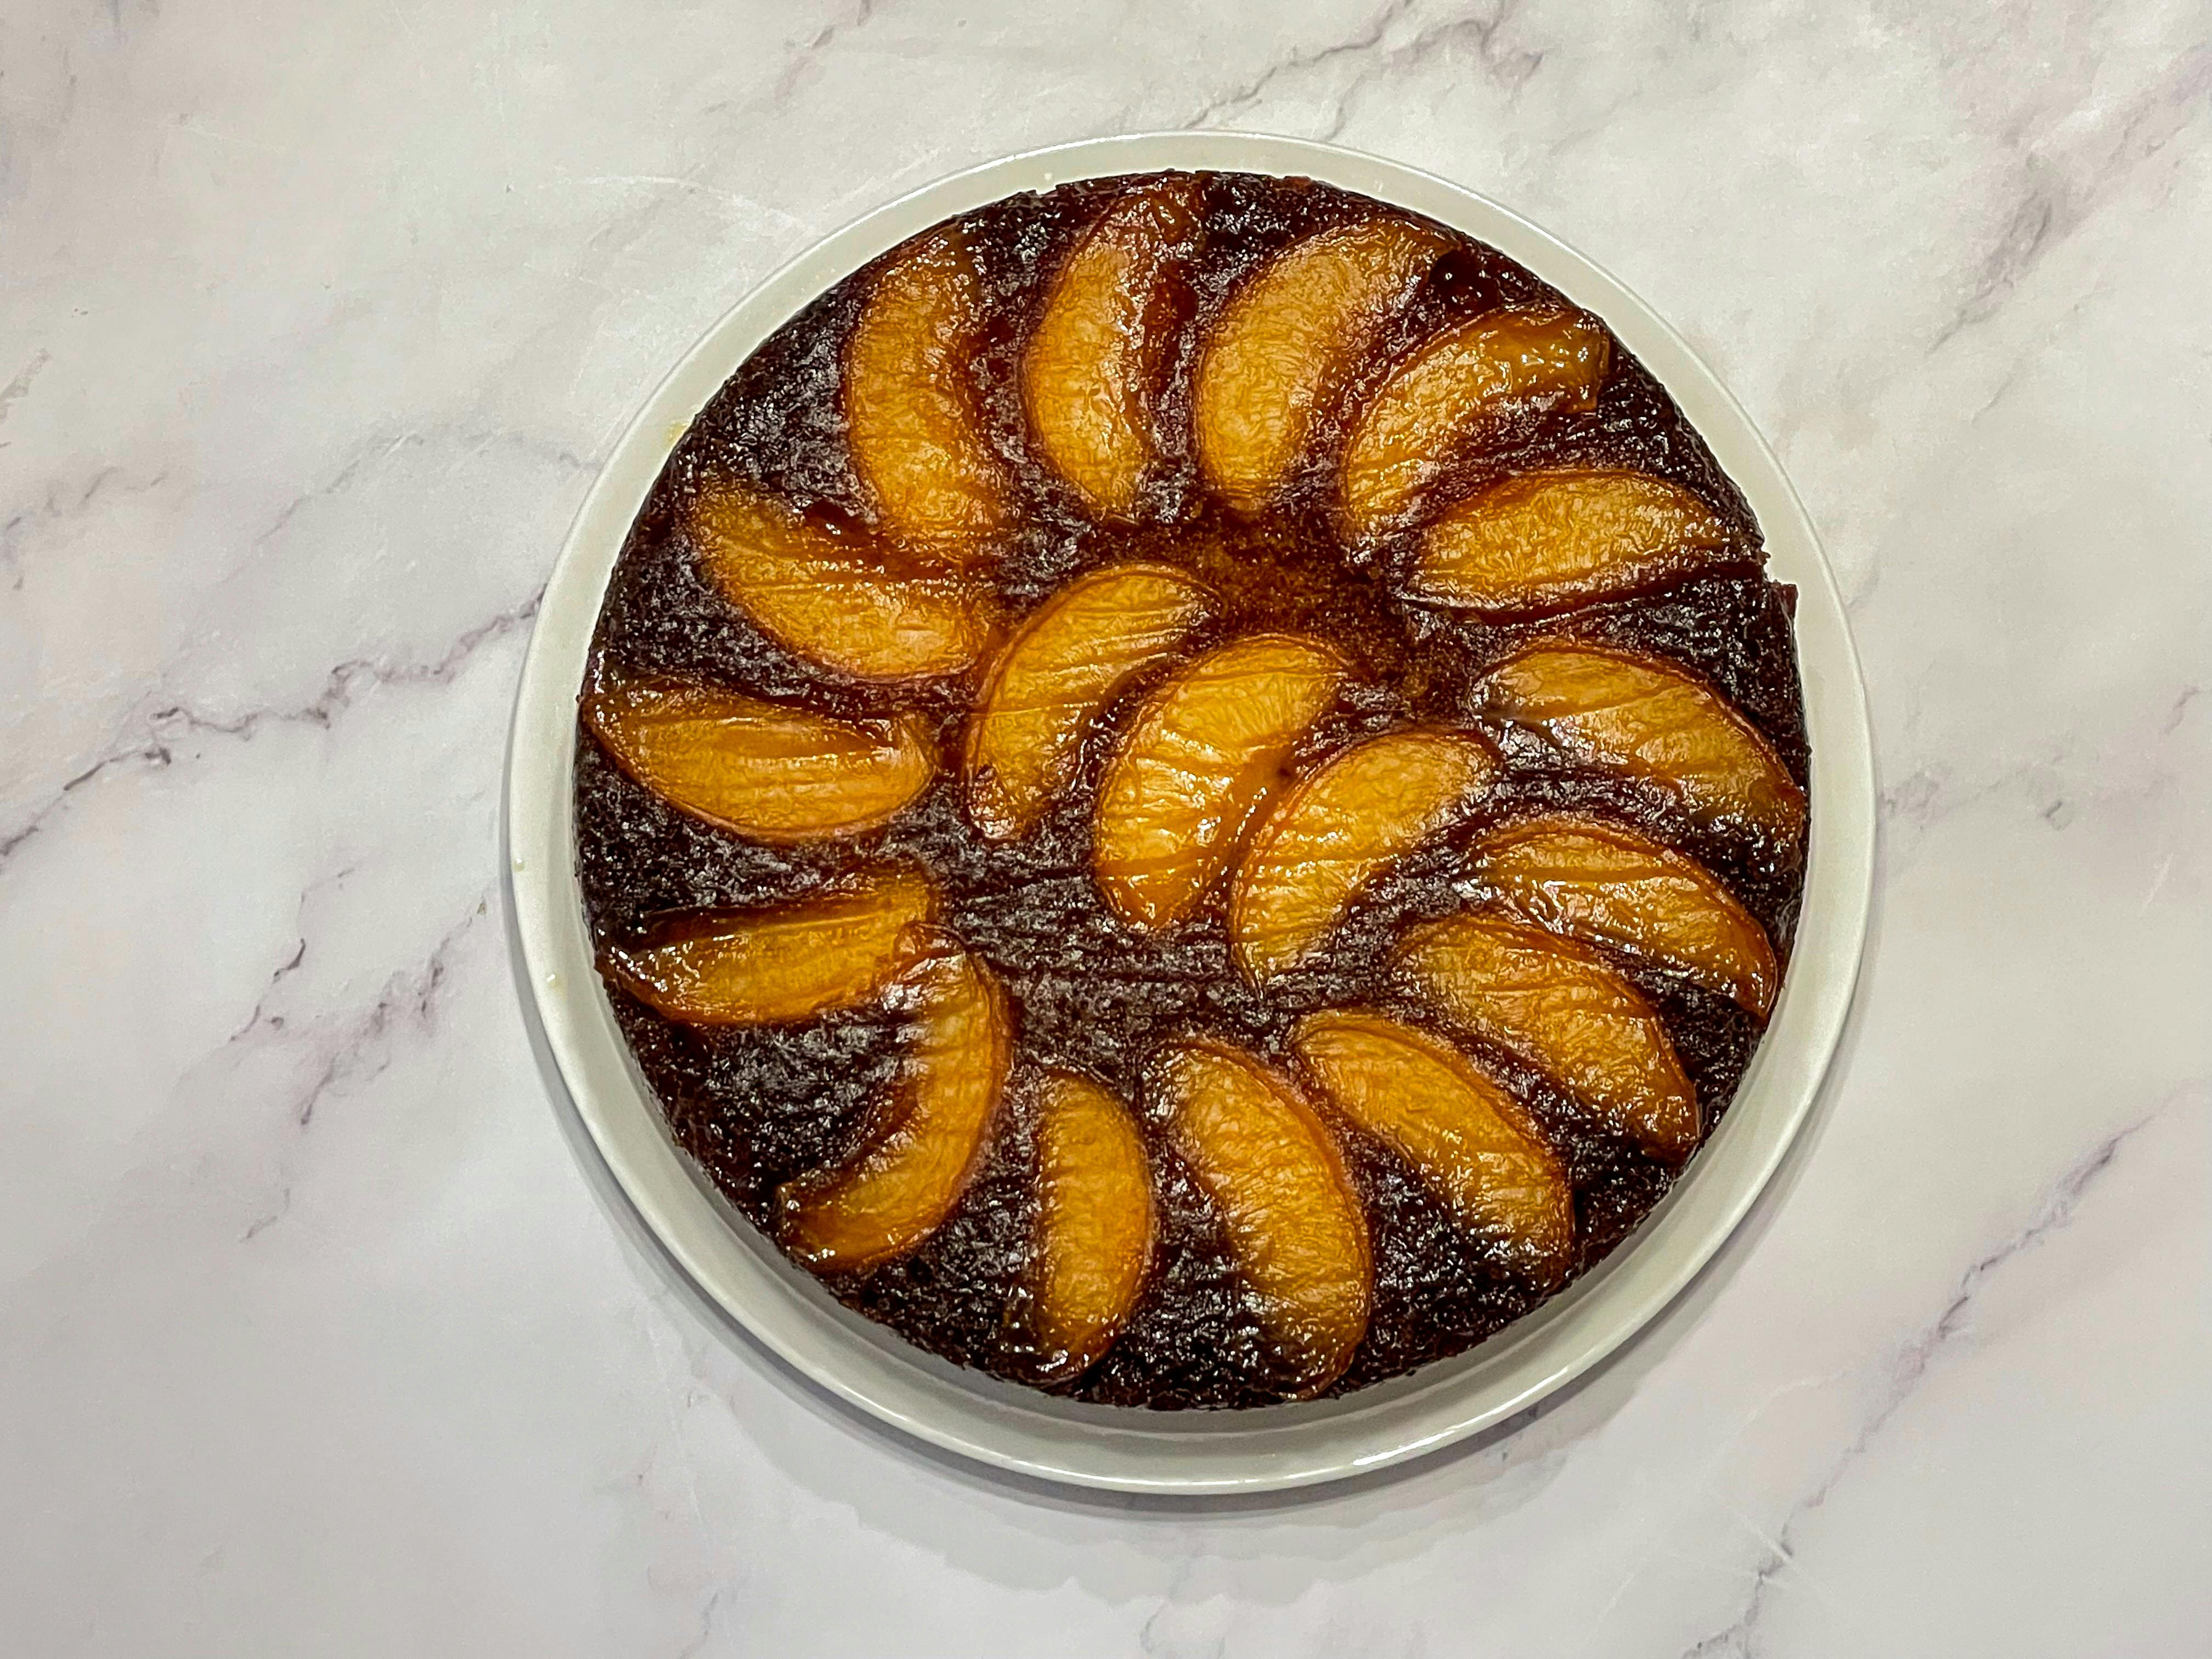 Peach upside down cake on a white marble surface